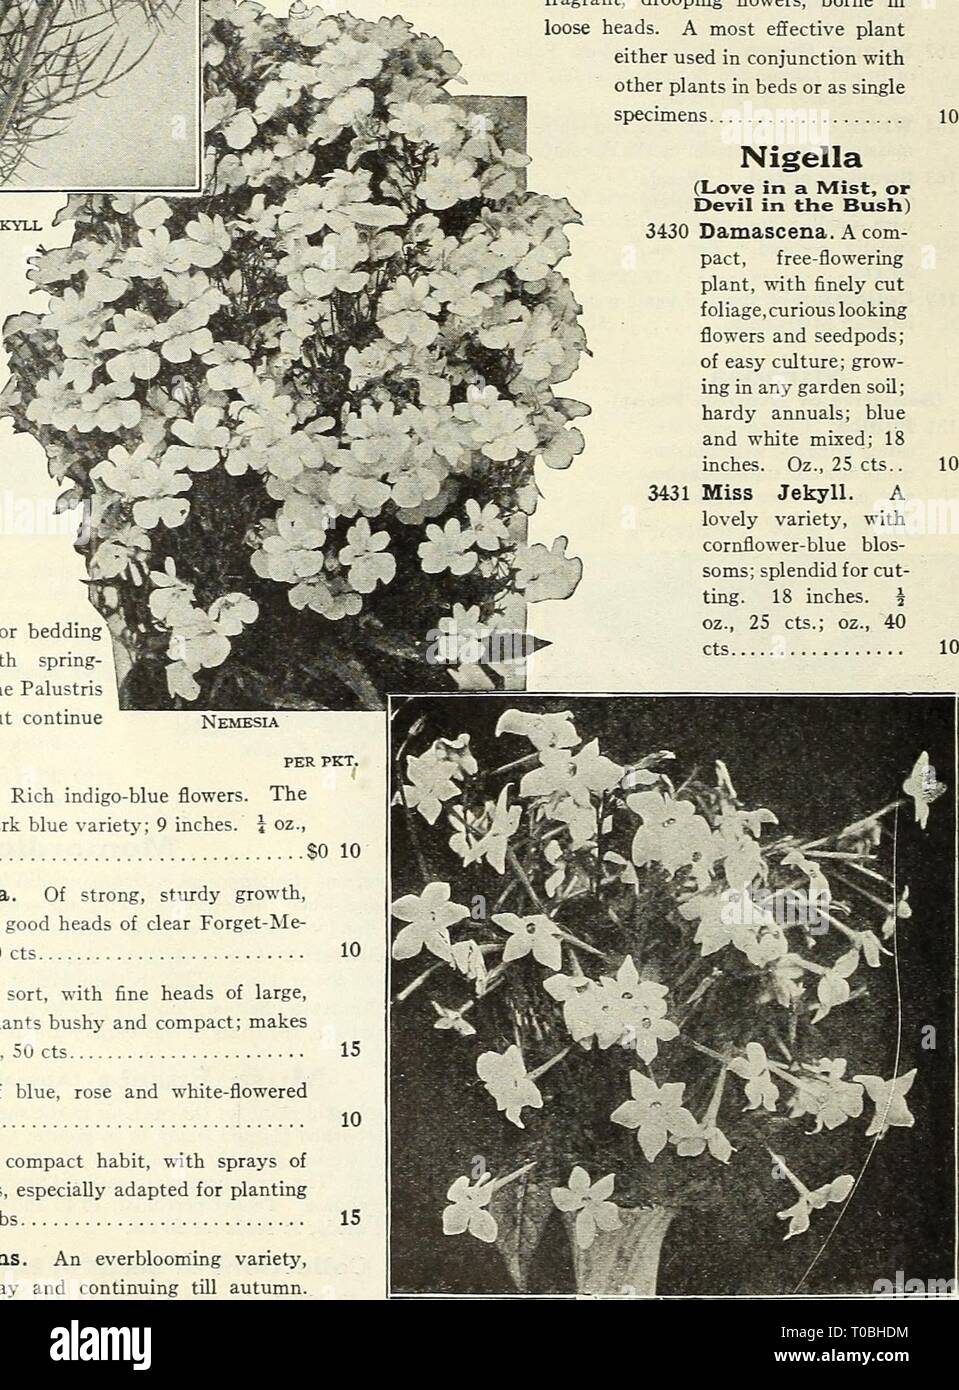 Dreer's garden book 1928 (1928) Dreer's garden book 1928 dreersgardenbook1928henr Year: 1928  3V-s Nigella Miss Jekyll Myosotis &gt;^f^ (Forget-Me-Not) Few spring flowers are moreS SL Smll admired than the lovely Forget- Me-Nots, which are especially effective when grown in masses. Perennials and hardy if given slight protection through the winter. Seed may be sown any time from spring till mid-sum- mer. The Alpestris varieties and Dissitiflora come into bloom in April, and are largely used for bedding or borders in connection with spring- flowering bulbs, Pansies, etc. The Palustris sorts do  Stock Photo